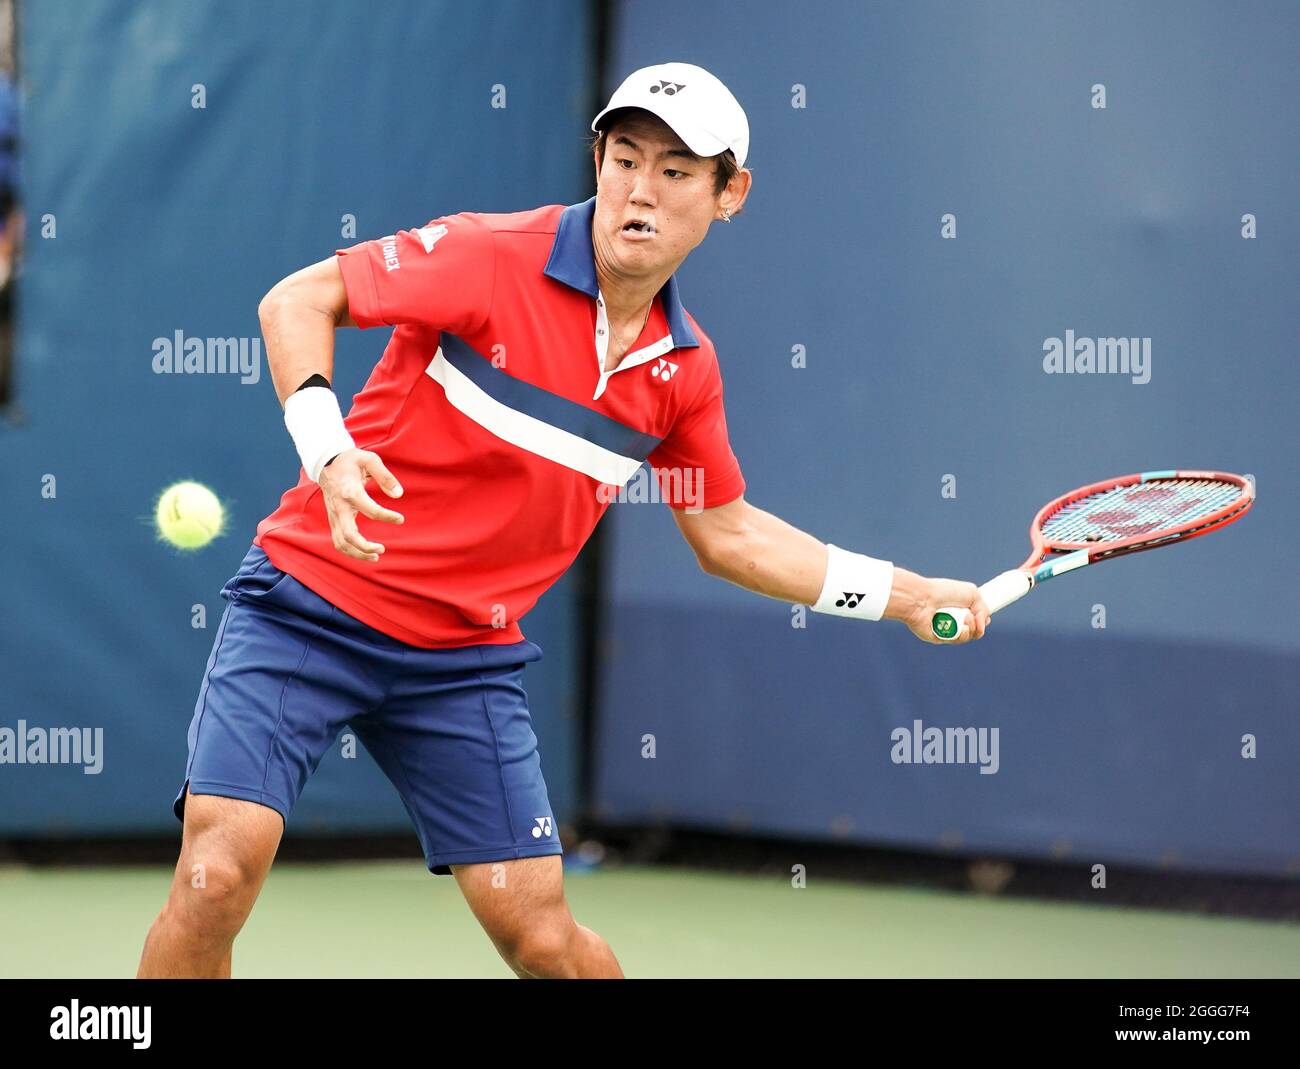 New York, United States. 31st Aug, 2021. Yoshihito Nishioka of Japan  returns the ball to Jack Sock of the USA in the second set of their first  round match held on Court